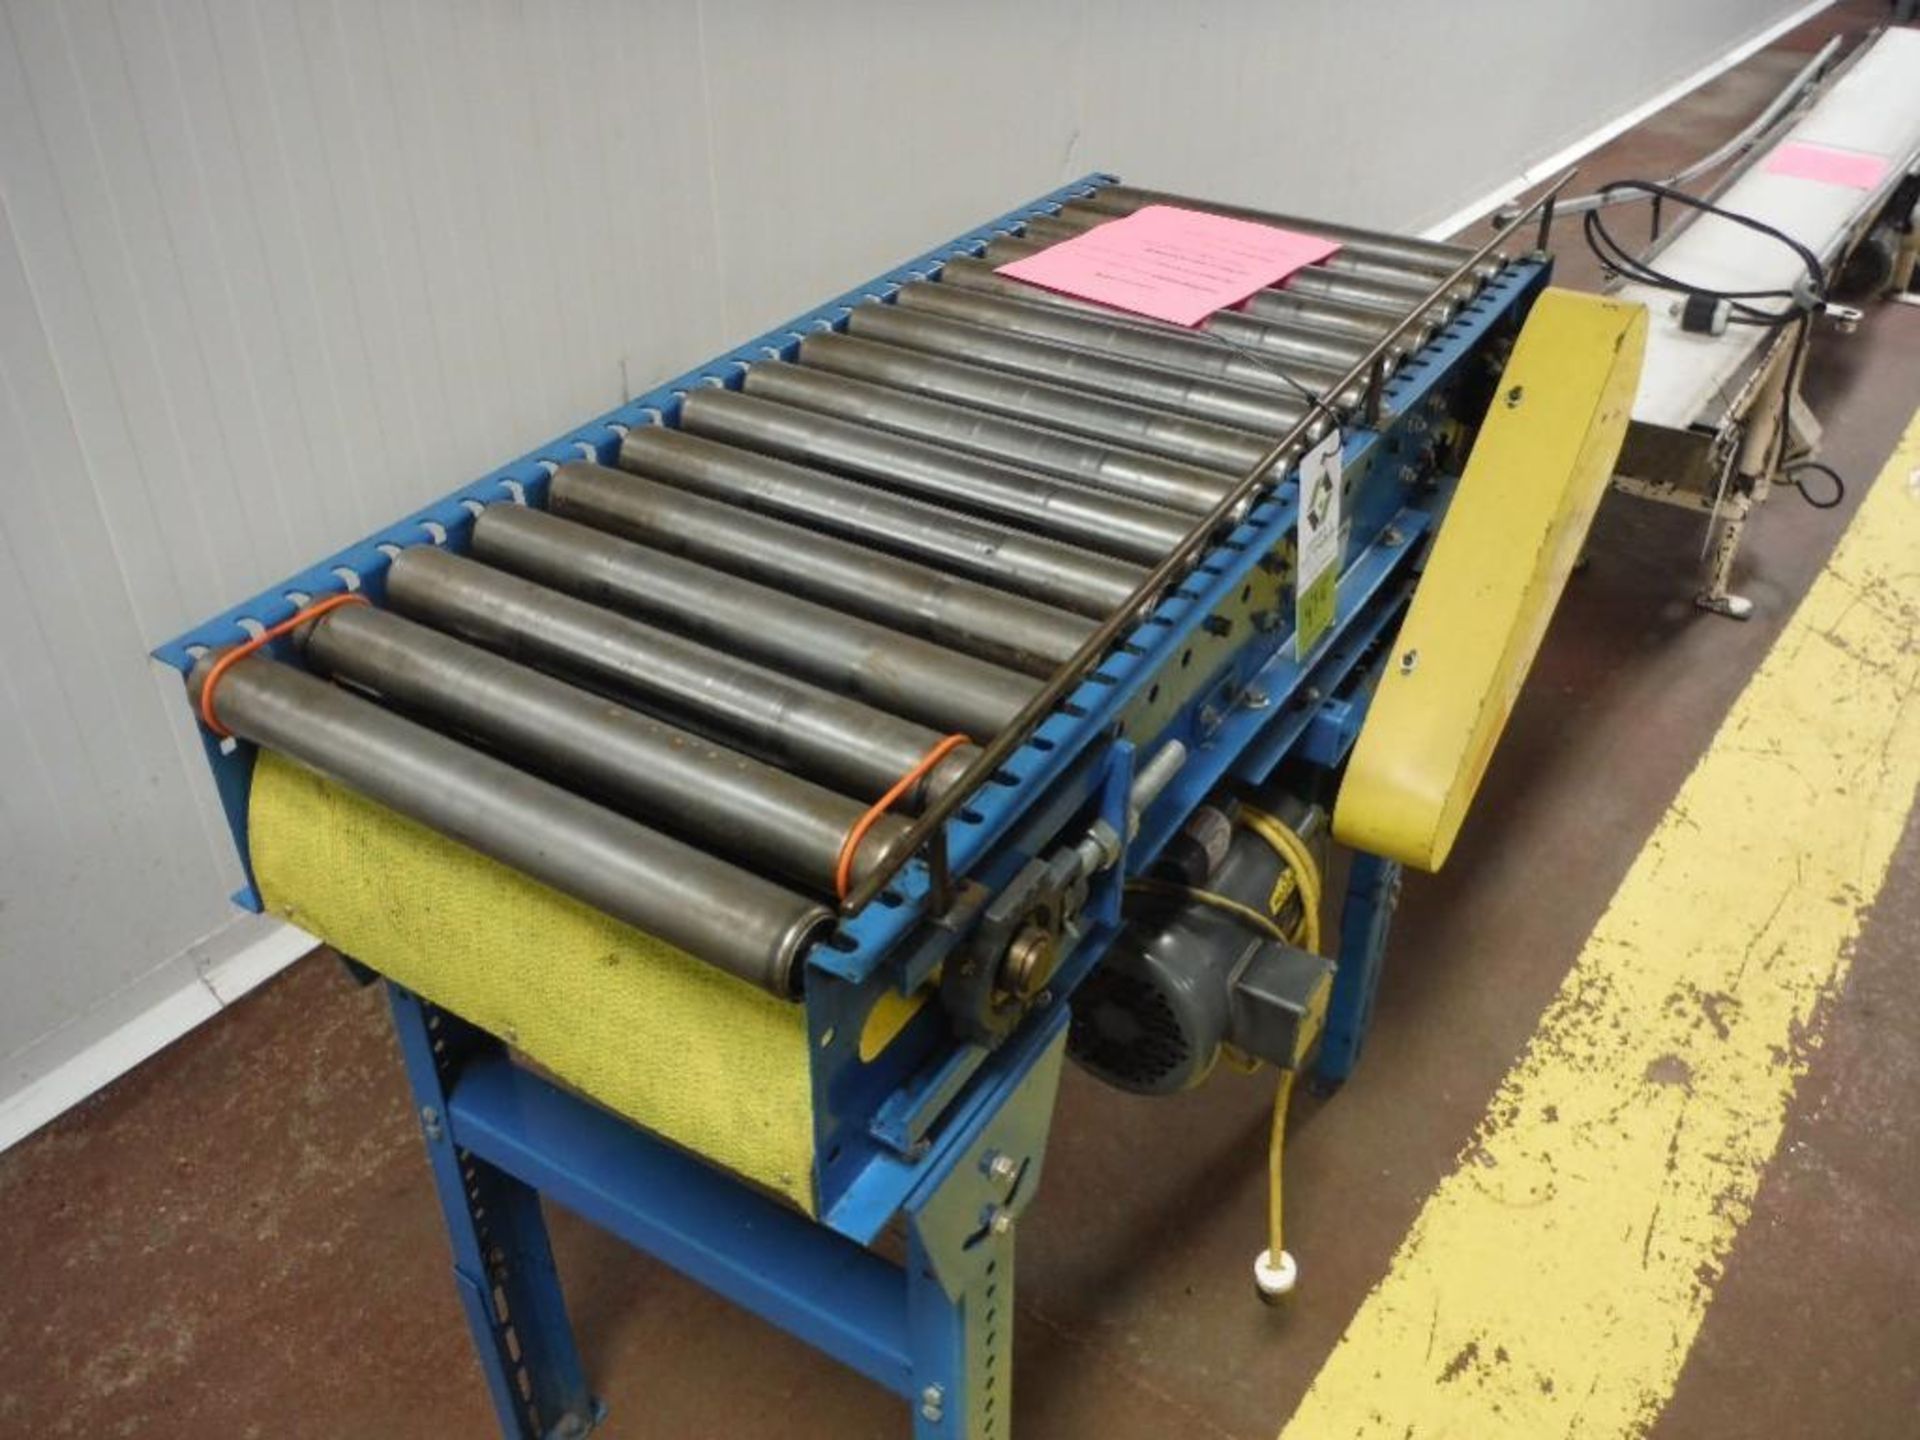 New London powered roller conveyor, 48 in. long x 16 in. wide rollers, motor and drive, steel frame - Image 2 of 6